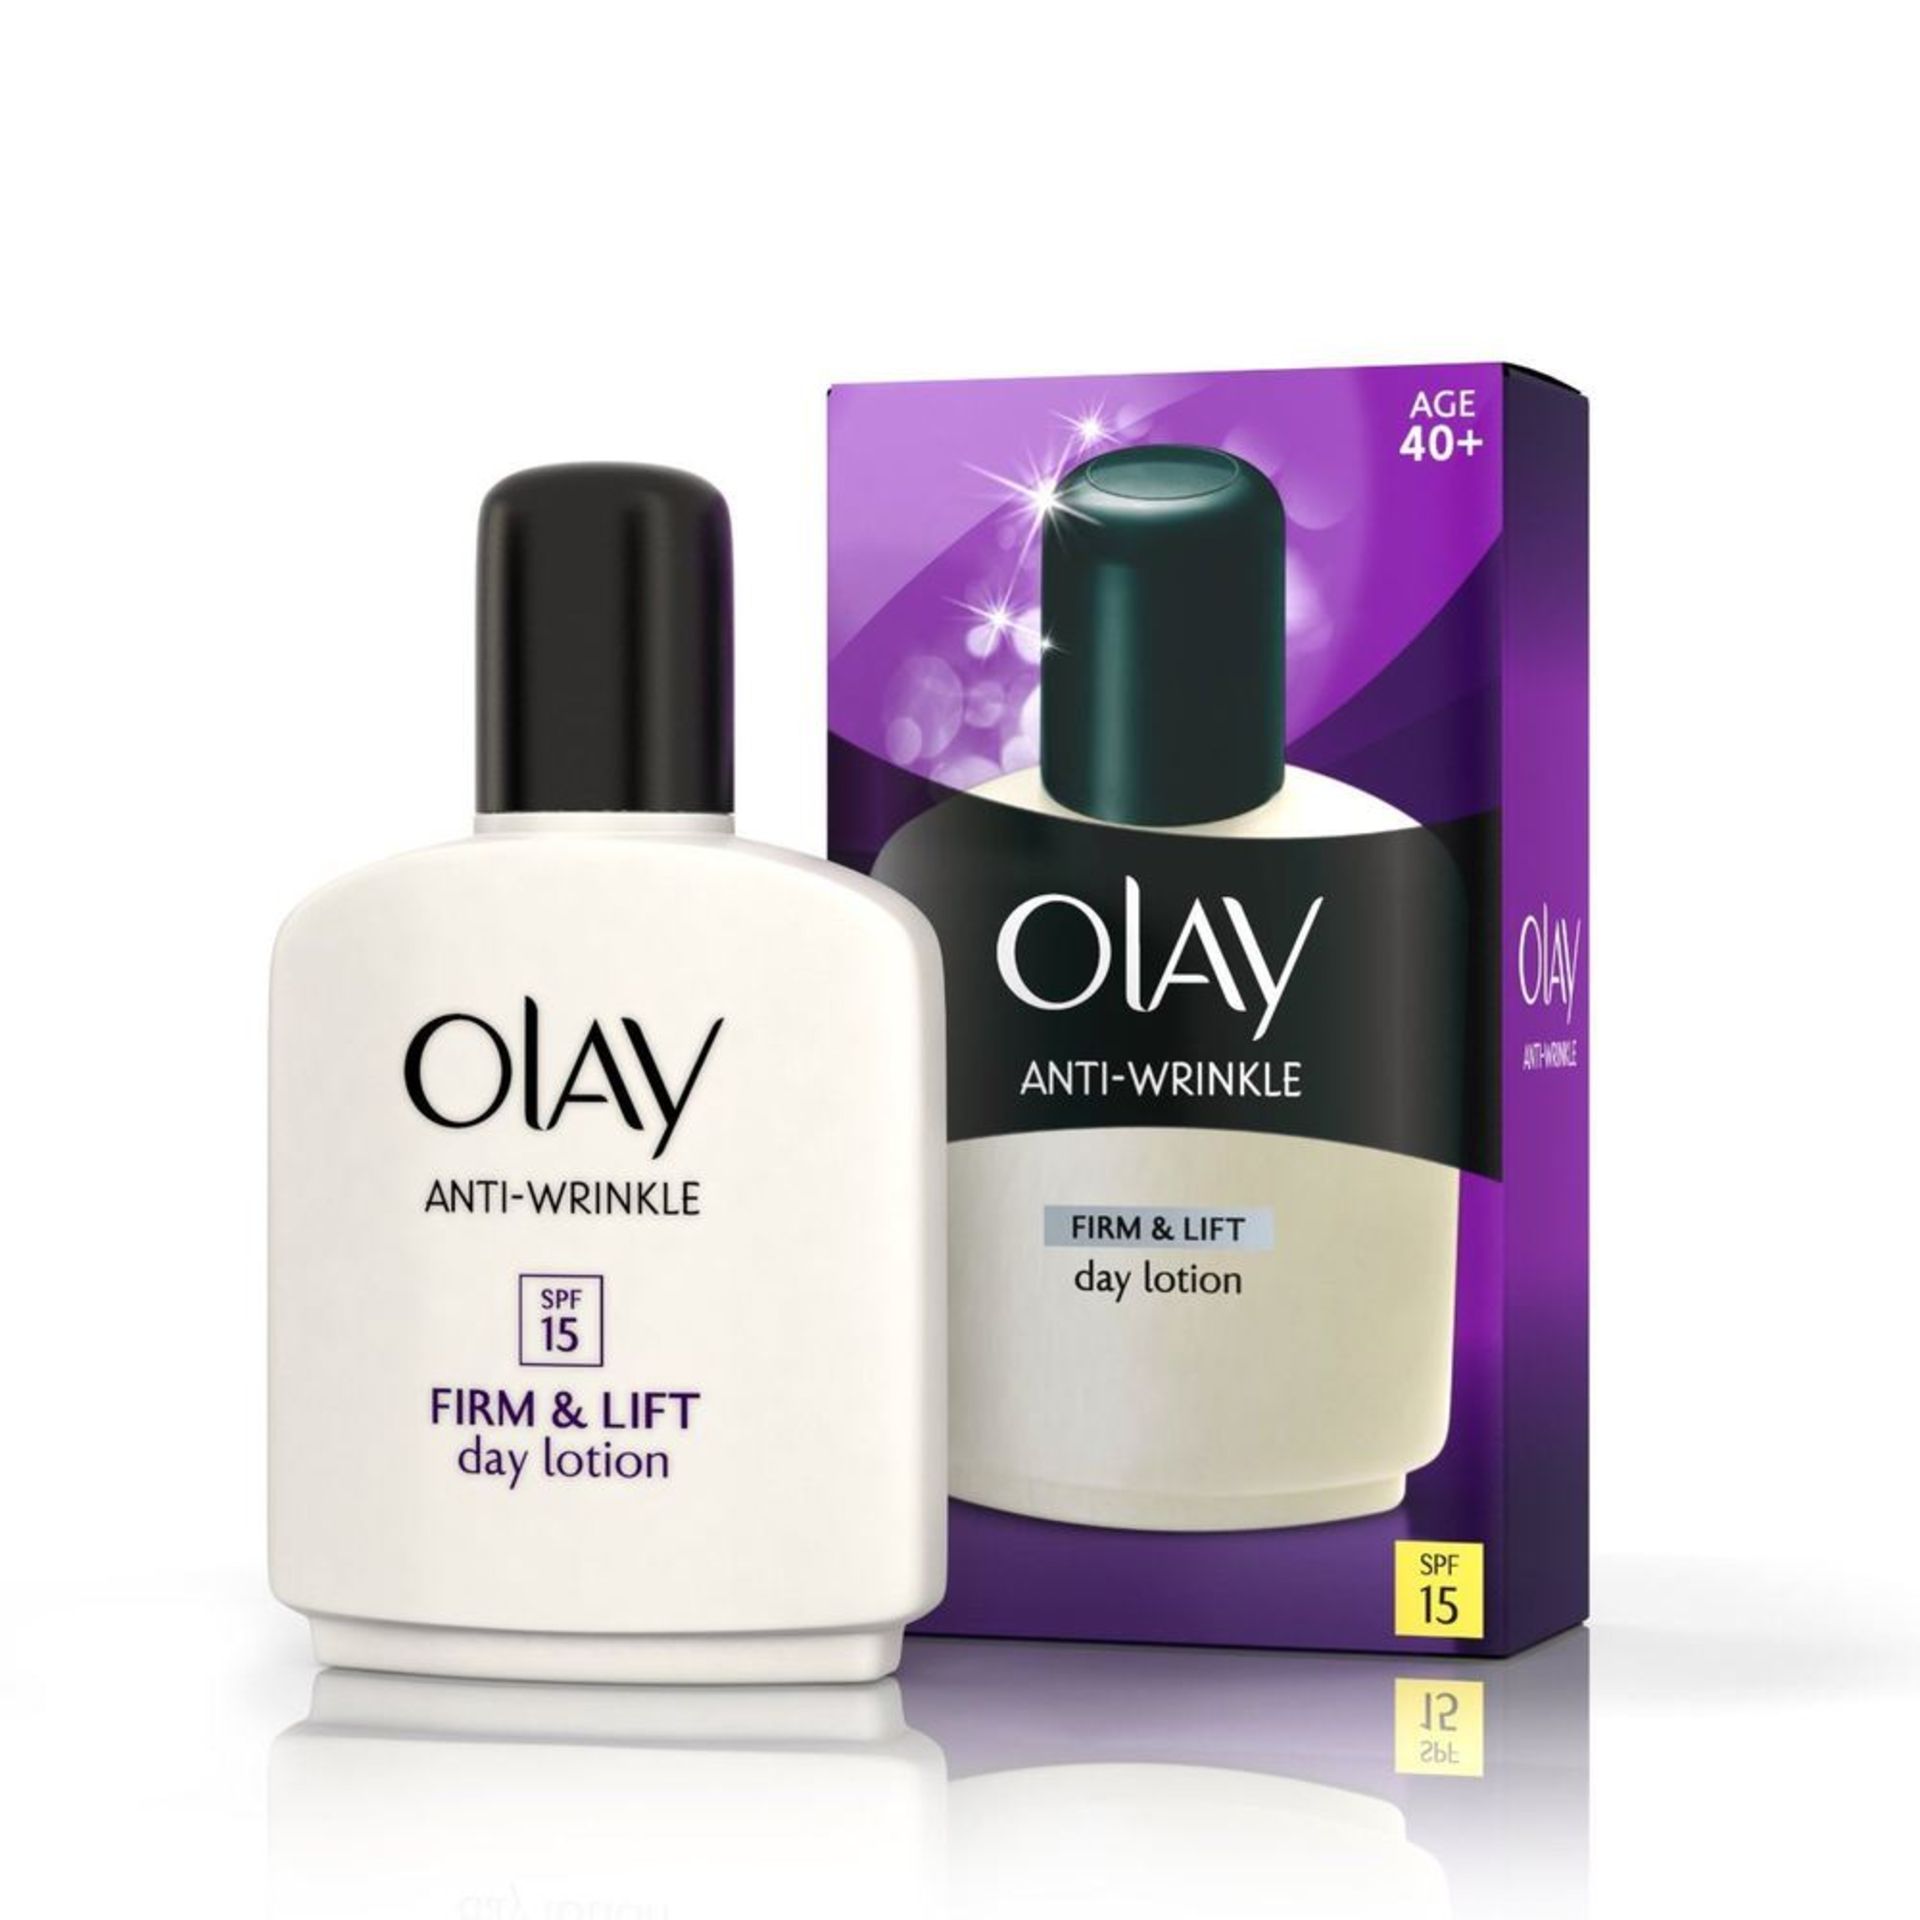 V *TRADE QTY* Brand New Olay Anti-Wrinkle Firm & Lift Day Lotion 100 ml/SPF15/40+ X 5 YOUR BID PRICE